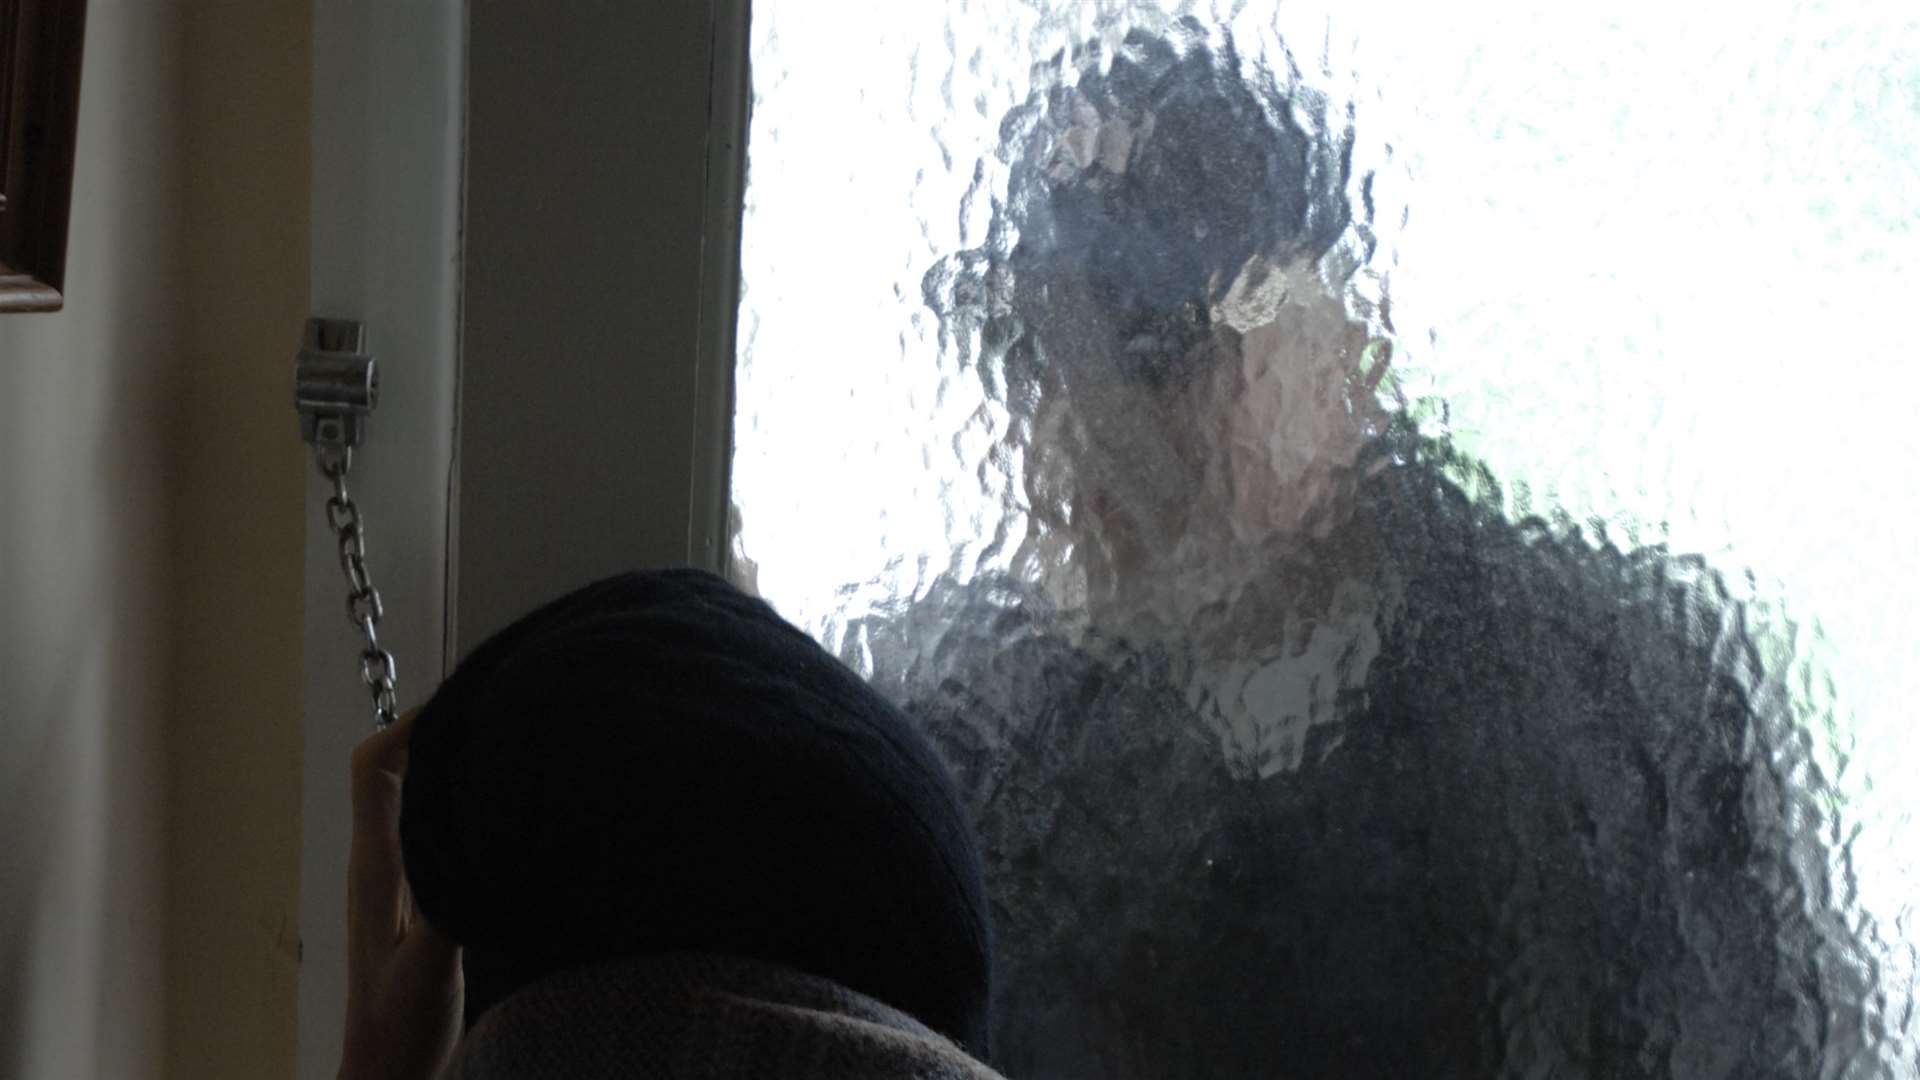 Rogue traders have targeted older people in their homes in Maidstone